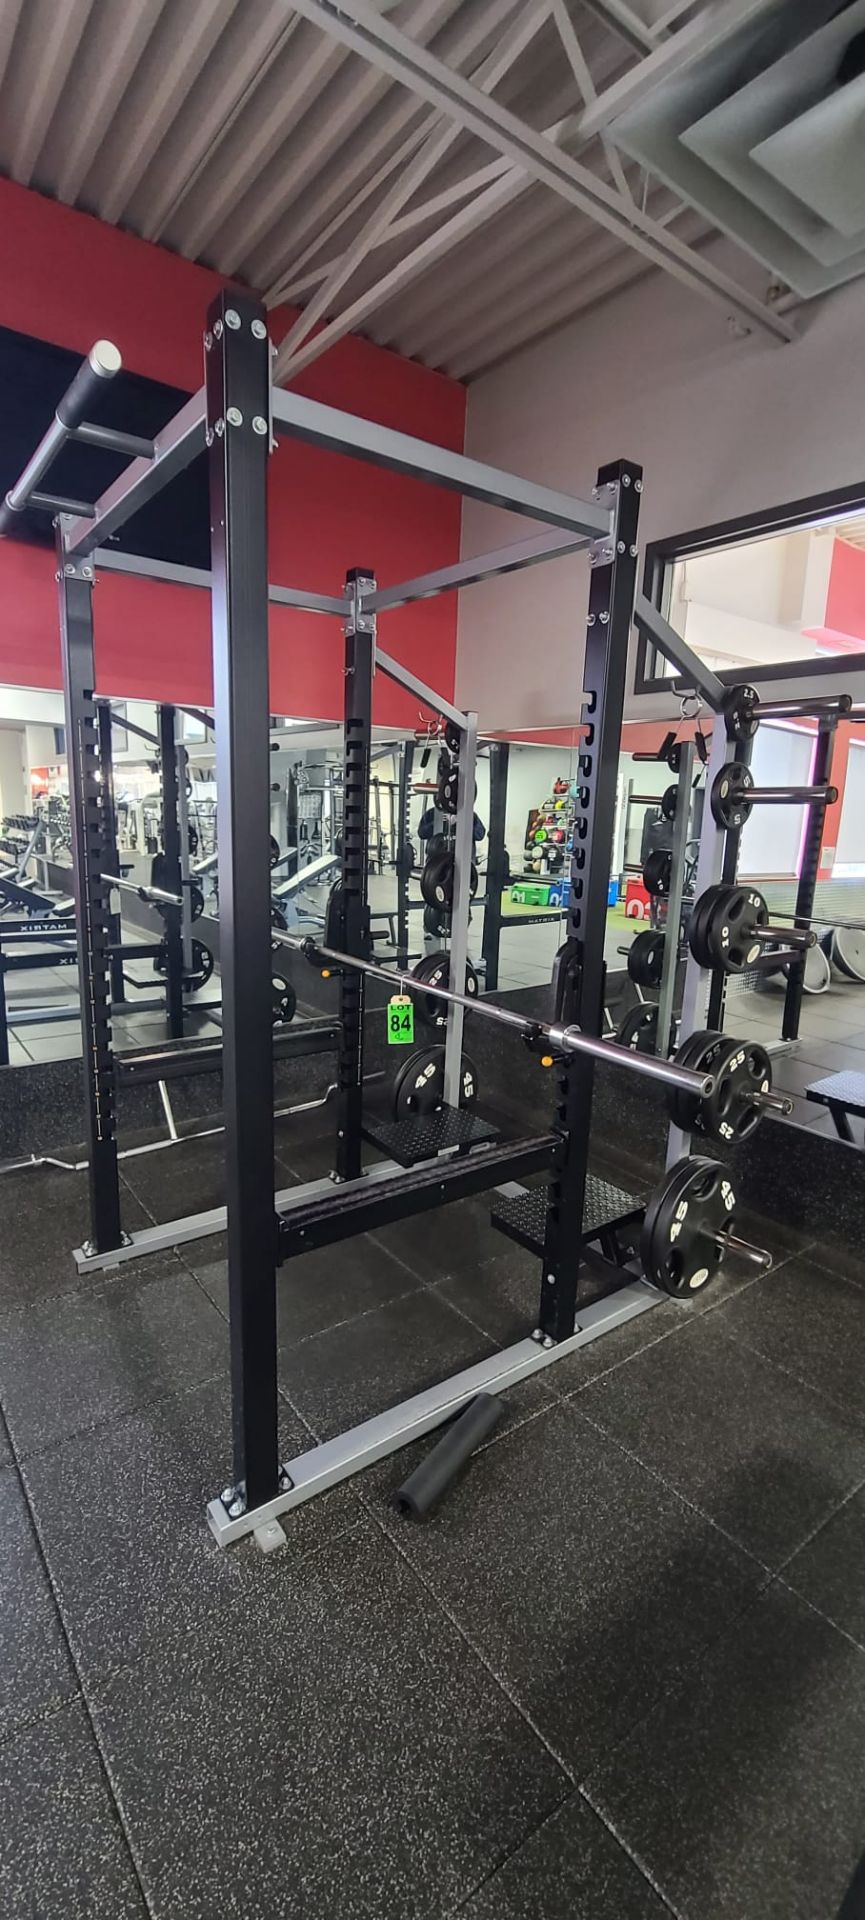 Complete MATRIX Squat Rack / Pull-Up Station incl. Rack, Bar, 350lbs of Free Weights - Image 5 of 6